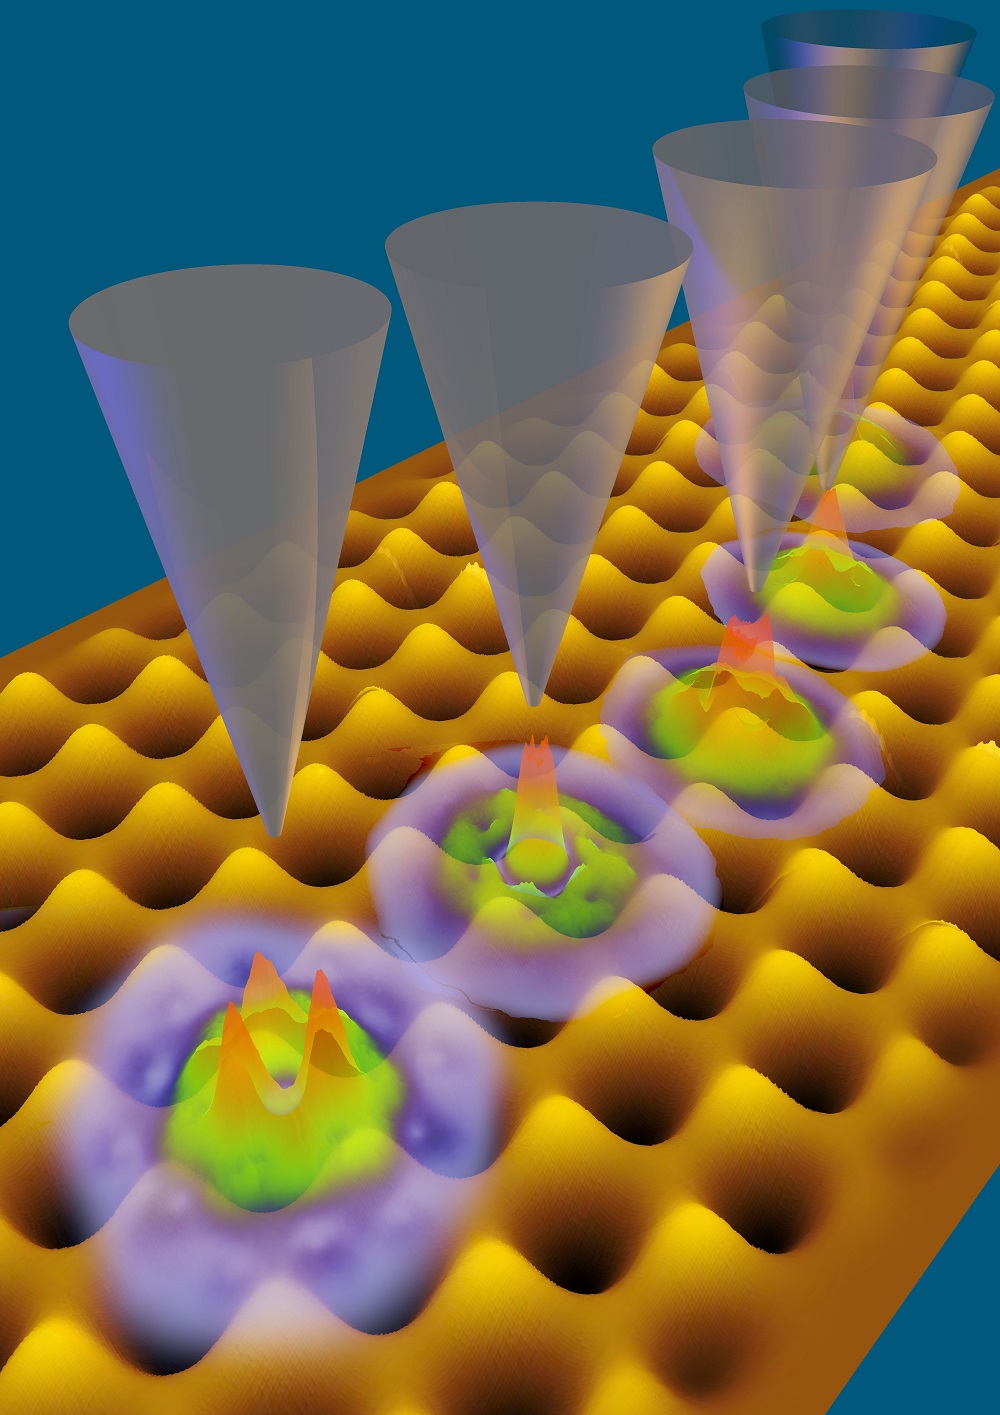 Tiny nanostructures allow excellent control over single electrons.